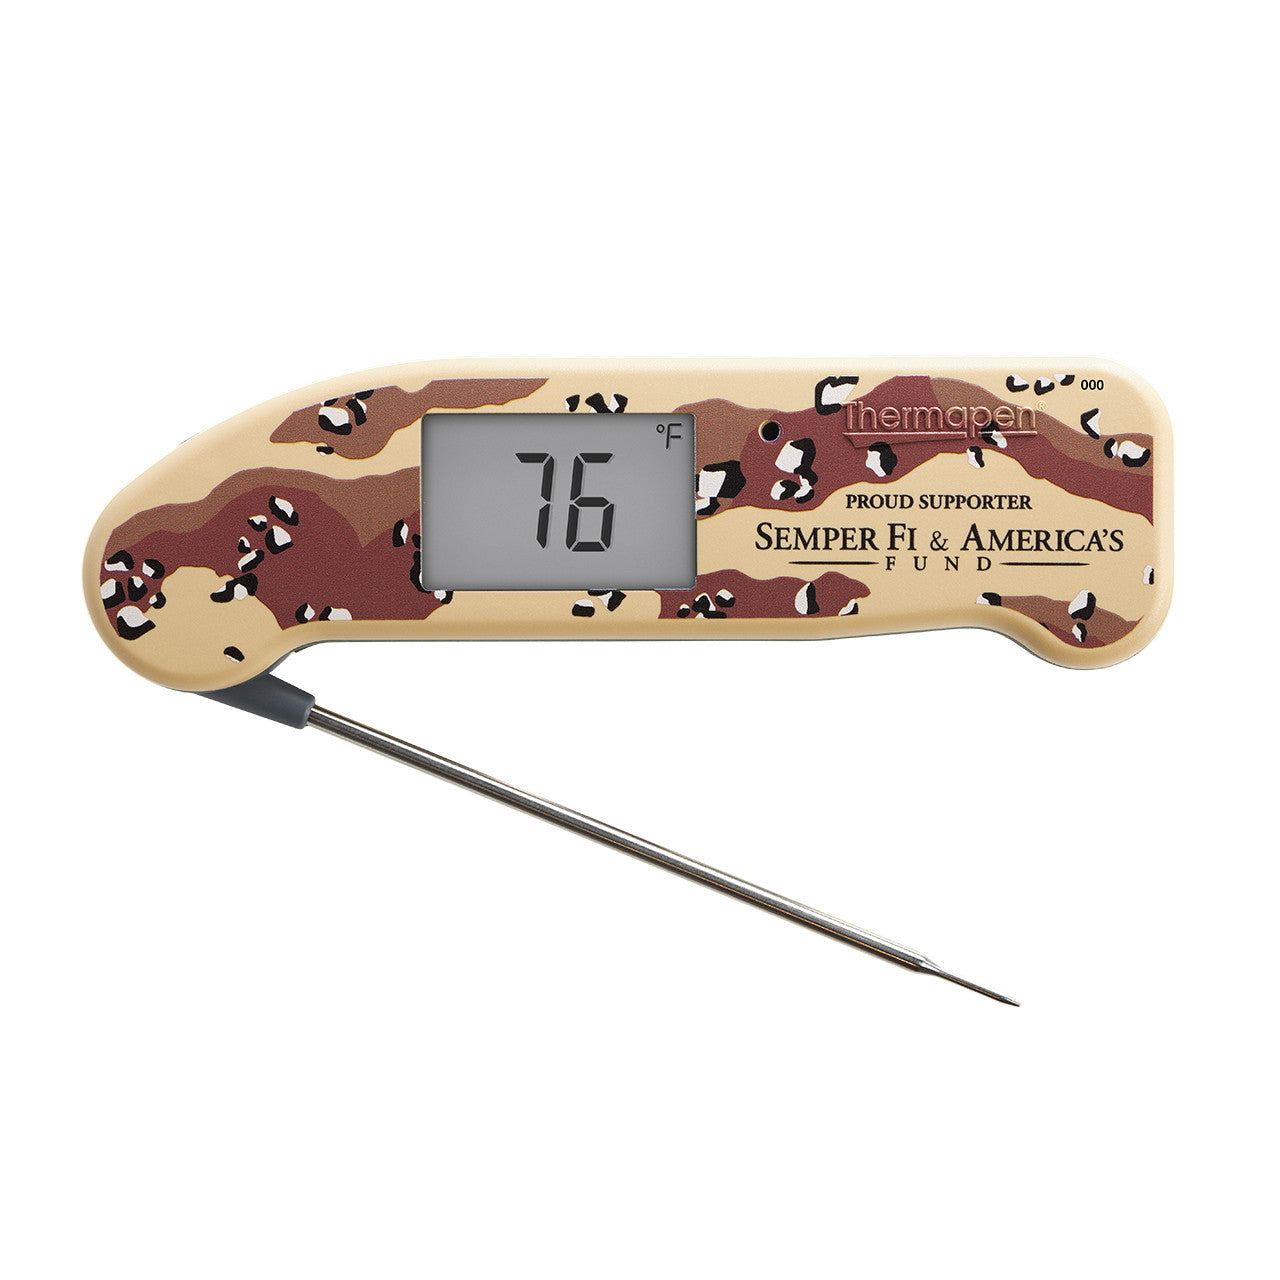 Thermapen One Desert Battle Camo Thermometer ThermoWorks Indigo Pool Patio BBQ